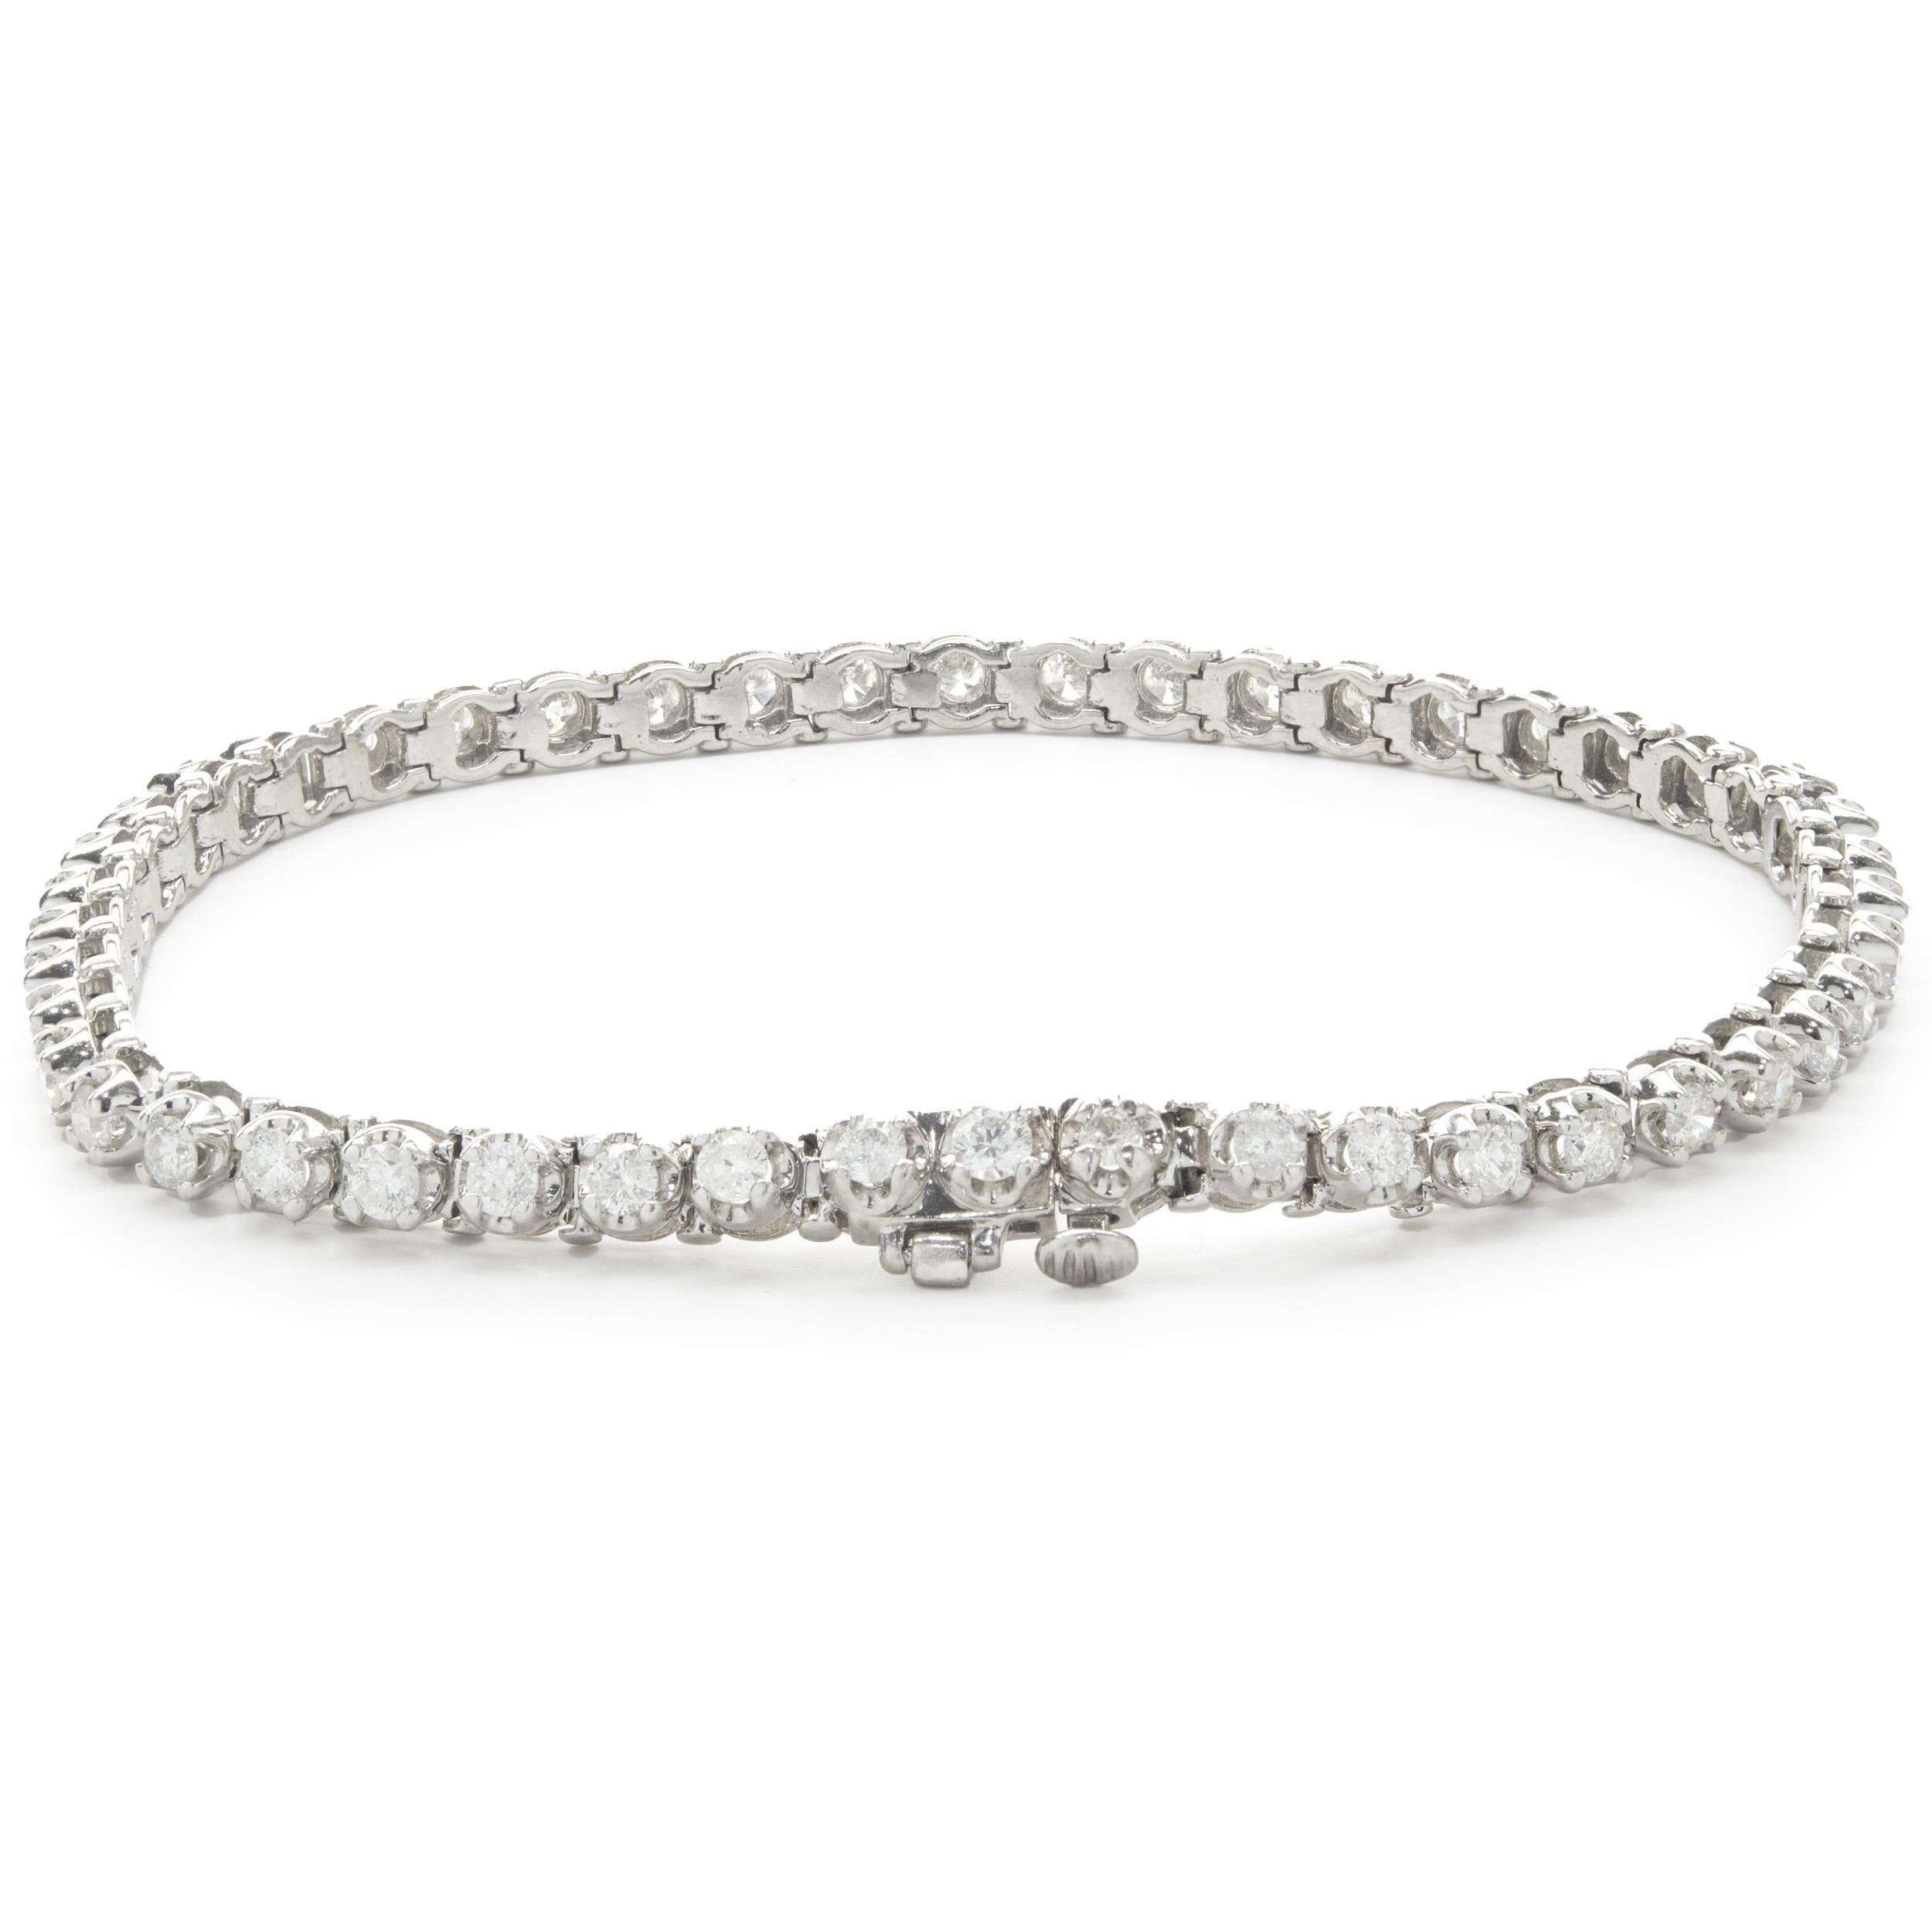 Designer: custom design
Material: 14K white gold
Diamonds: 47 round brilliant cut = 2.35cttw
Color: H
Clarity: I1-2
Dimensions: bracelet will fit up to a 7-inch wrist
Weight: 11.03 grams